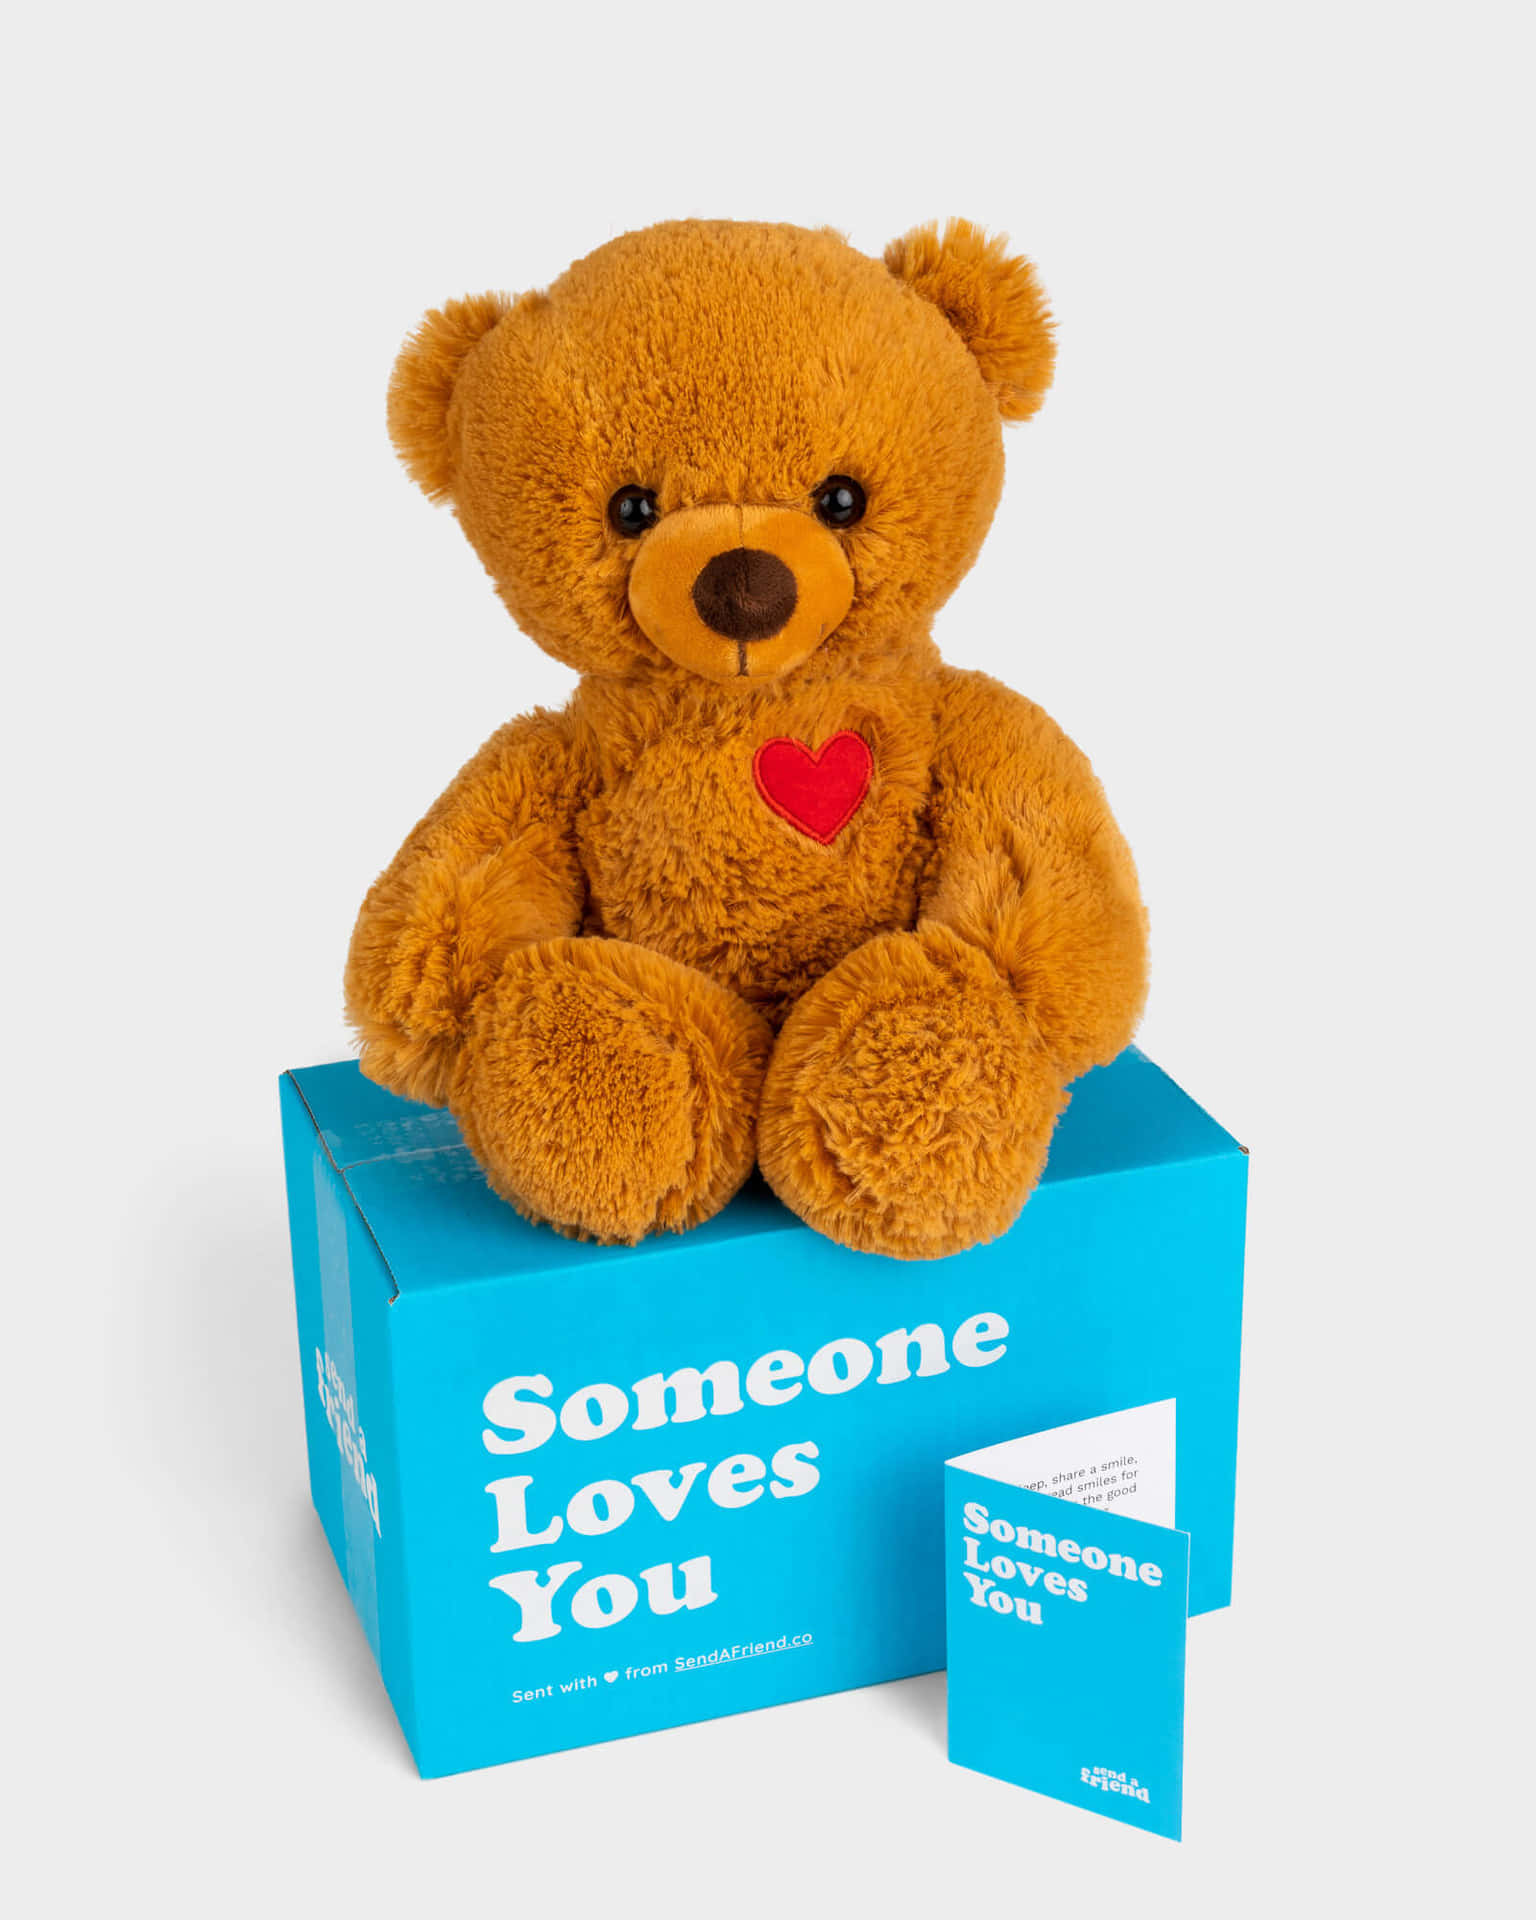 Wrap yourself up in a warm hug with this cozy teddy bear.